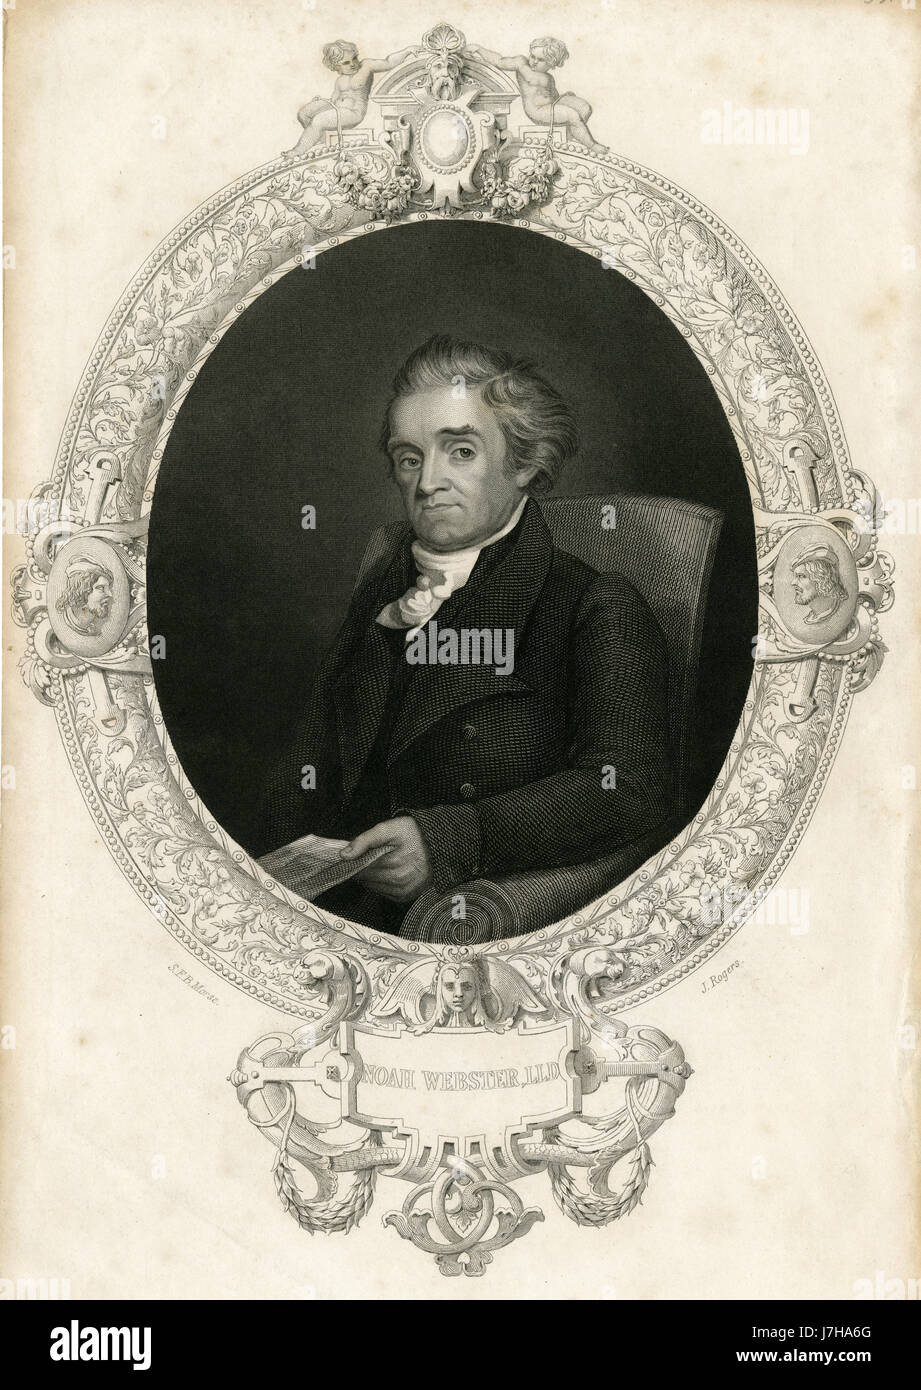 Antique c1860 engraving, Noah Webster. Noah Webster, Jr. (1758-1843) was an American lexicographer, textbook pioneer, English-language spelling reformer, political writer, editor, and prolific author. SOURCE: ORIGINAL ENGRAVING. Stock Photo